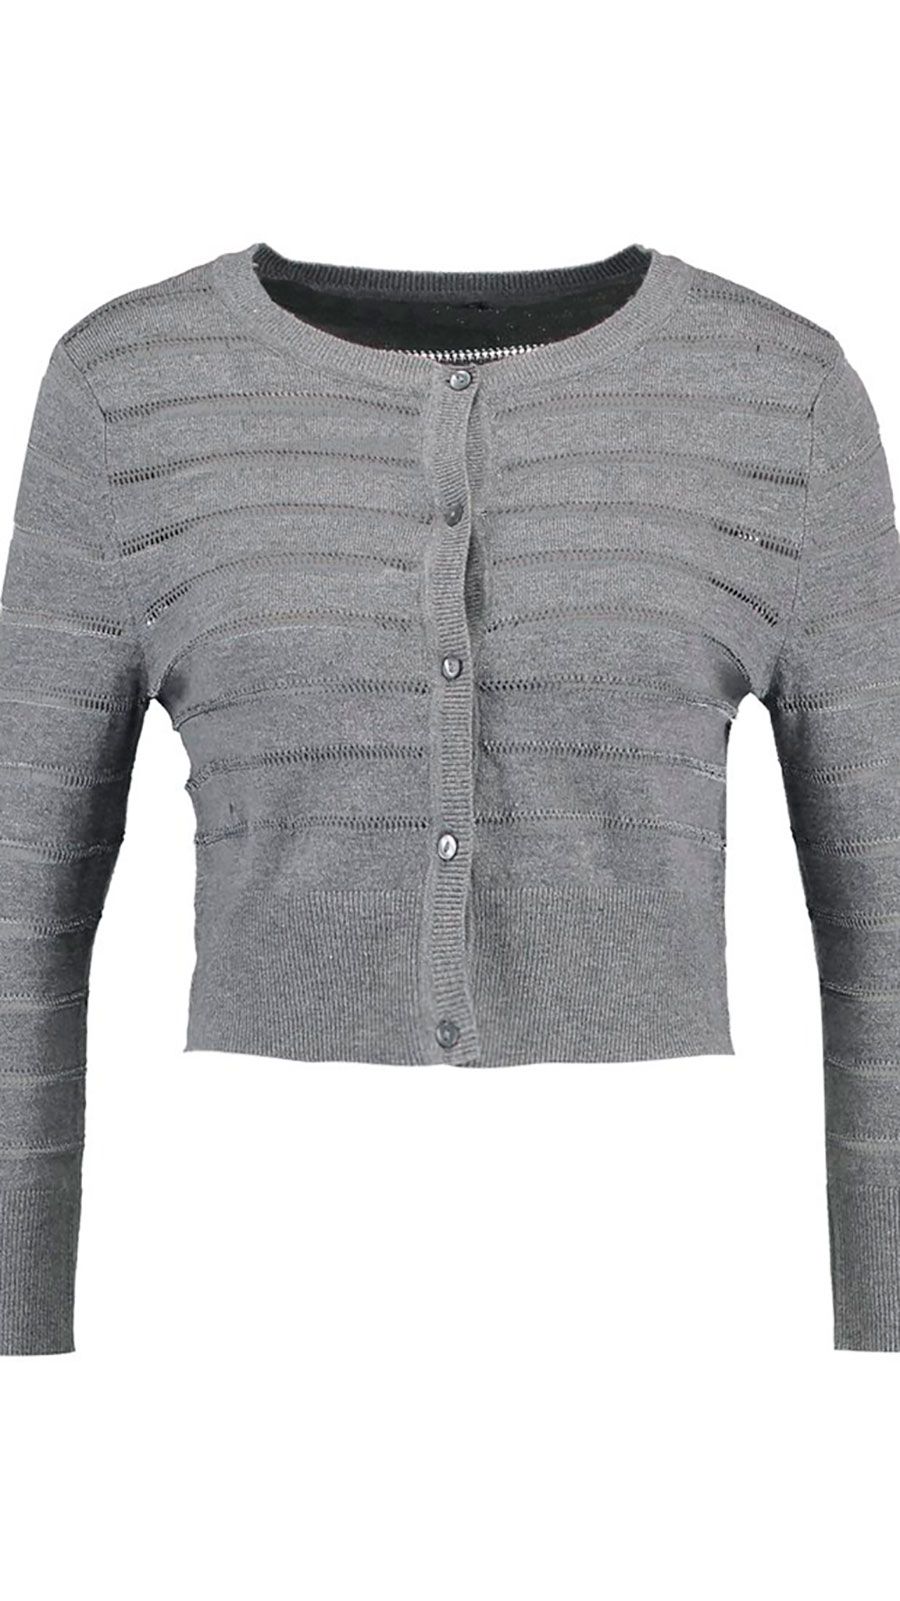 Clothing, Outerwear, Sleeve, Cardigan, Sweater, Grey, Jacket, Vest, Top, Jersey, 